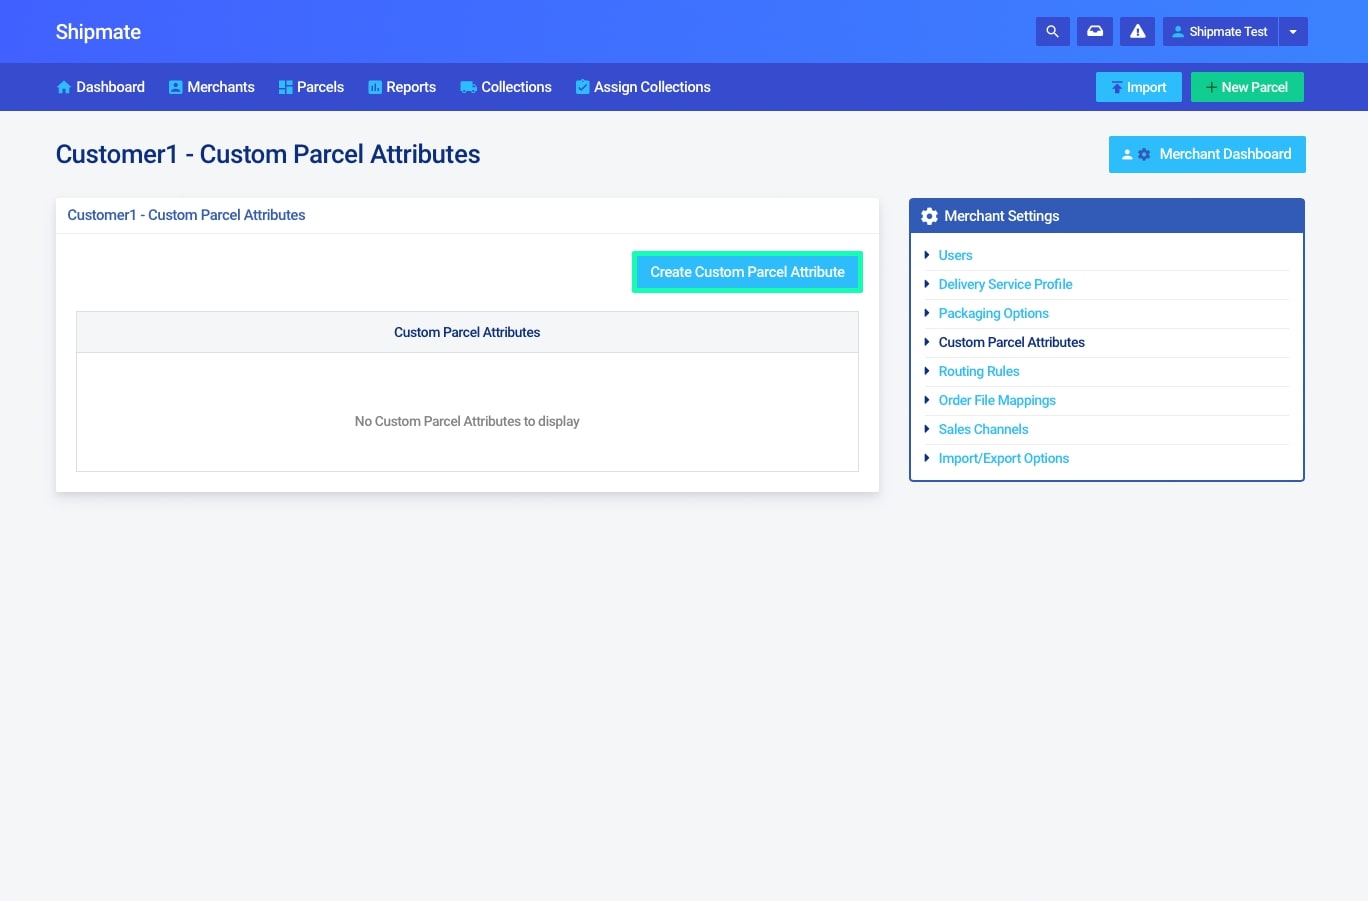 Shipmate - Your Account - Adding Custom Parcel Attributes